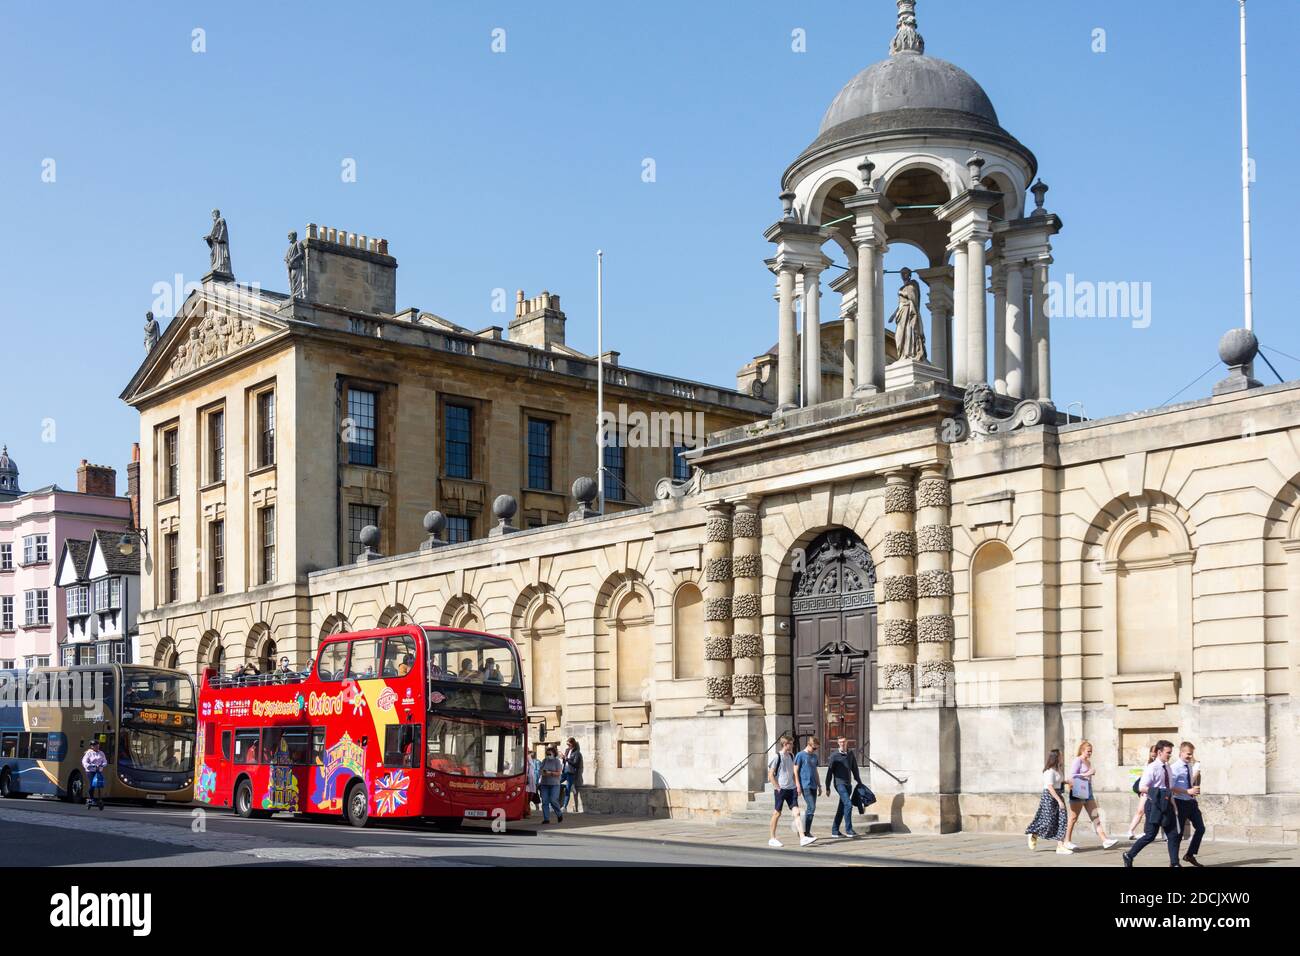 The Queen's College, High Street, Oxford, Oxfordshire, Angleterre, Royaume-Uni Banque D'Images